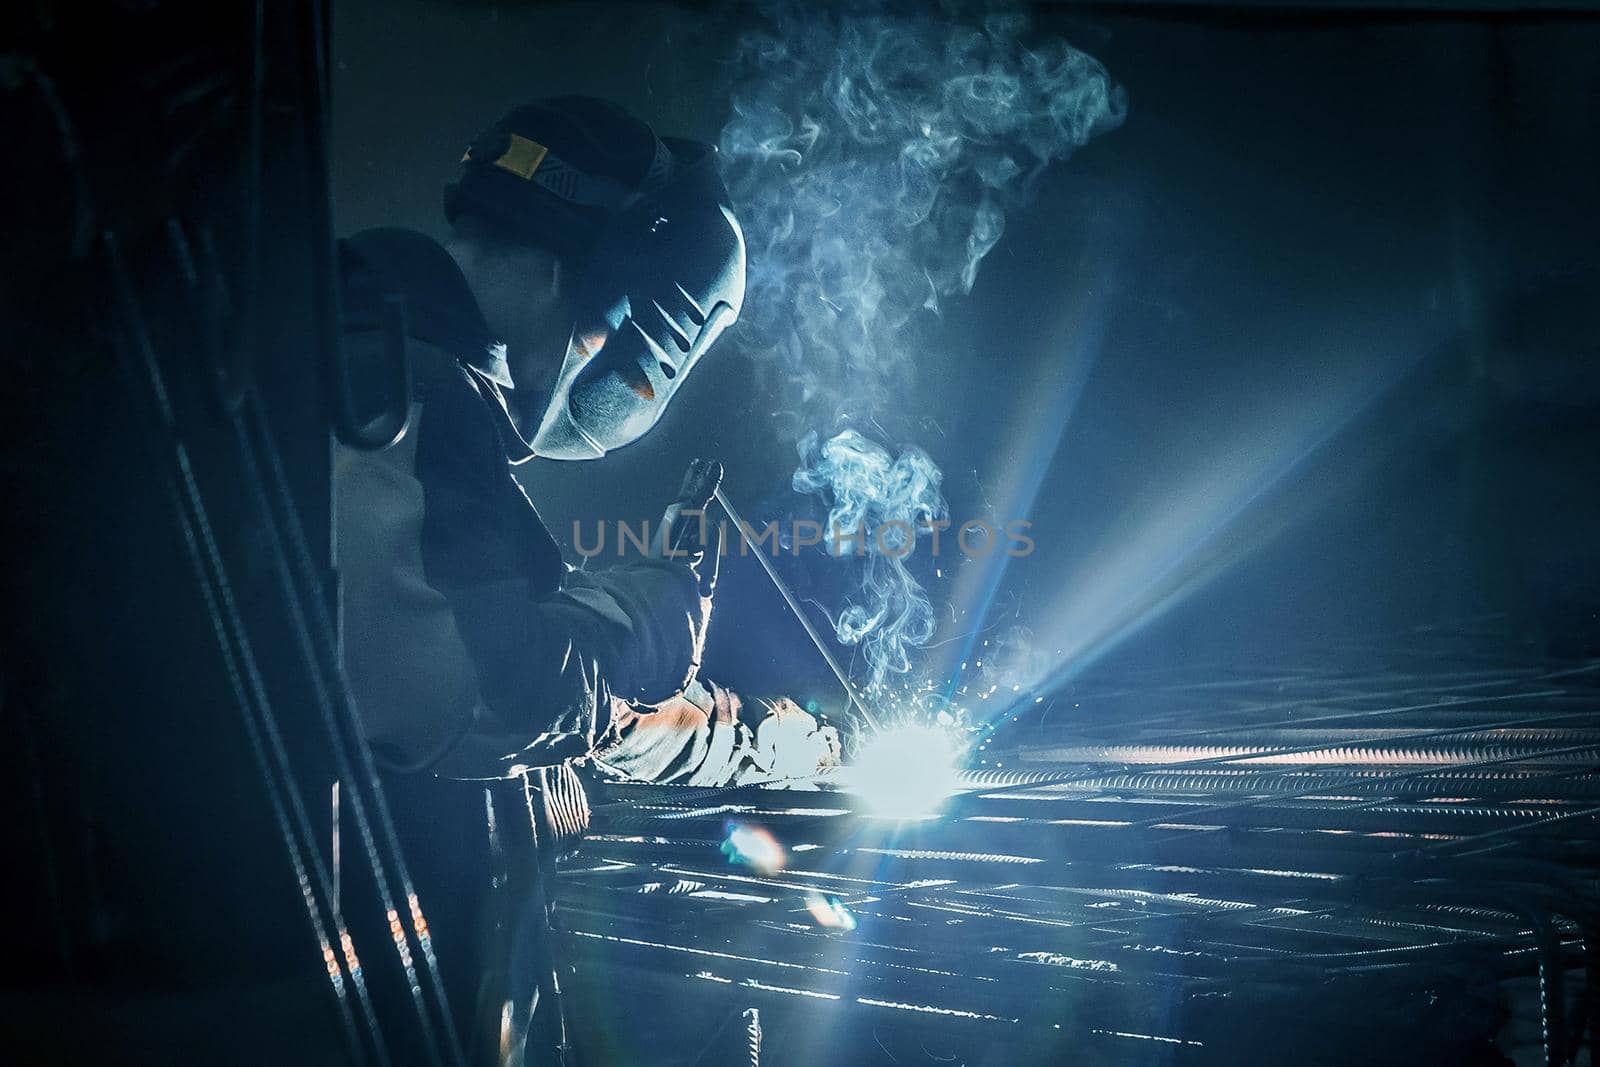 A masked working man is doing welding work on metal structures in a factory or industrial enterprise by AYDO8